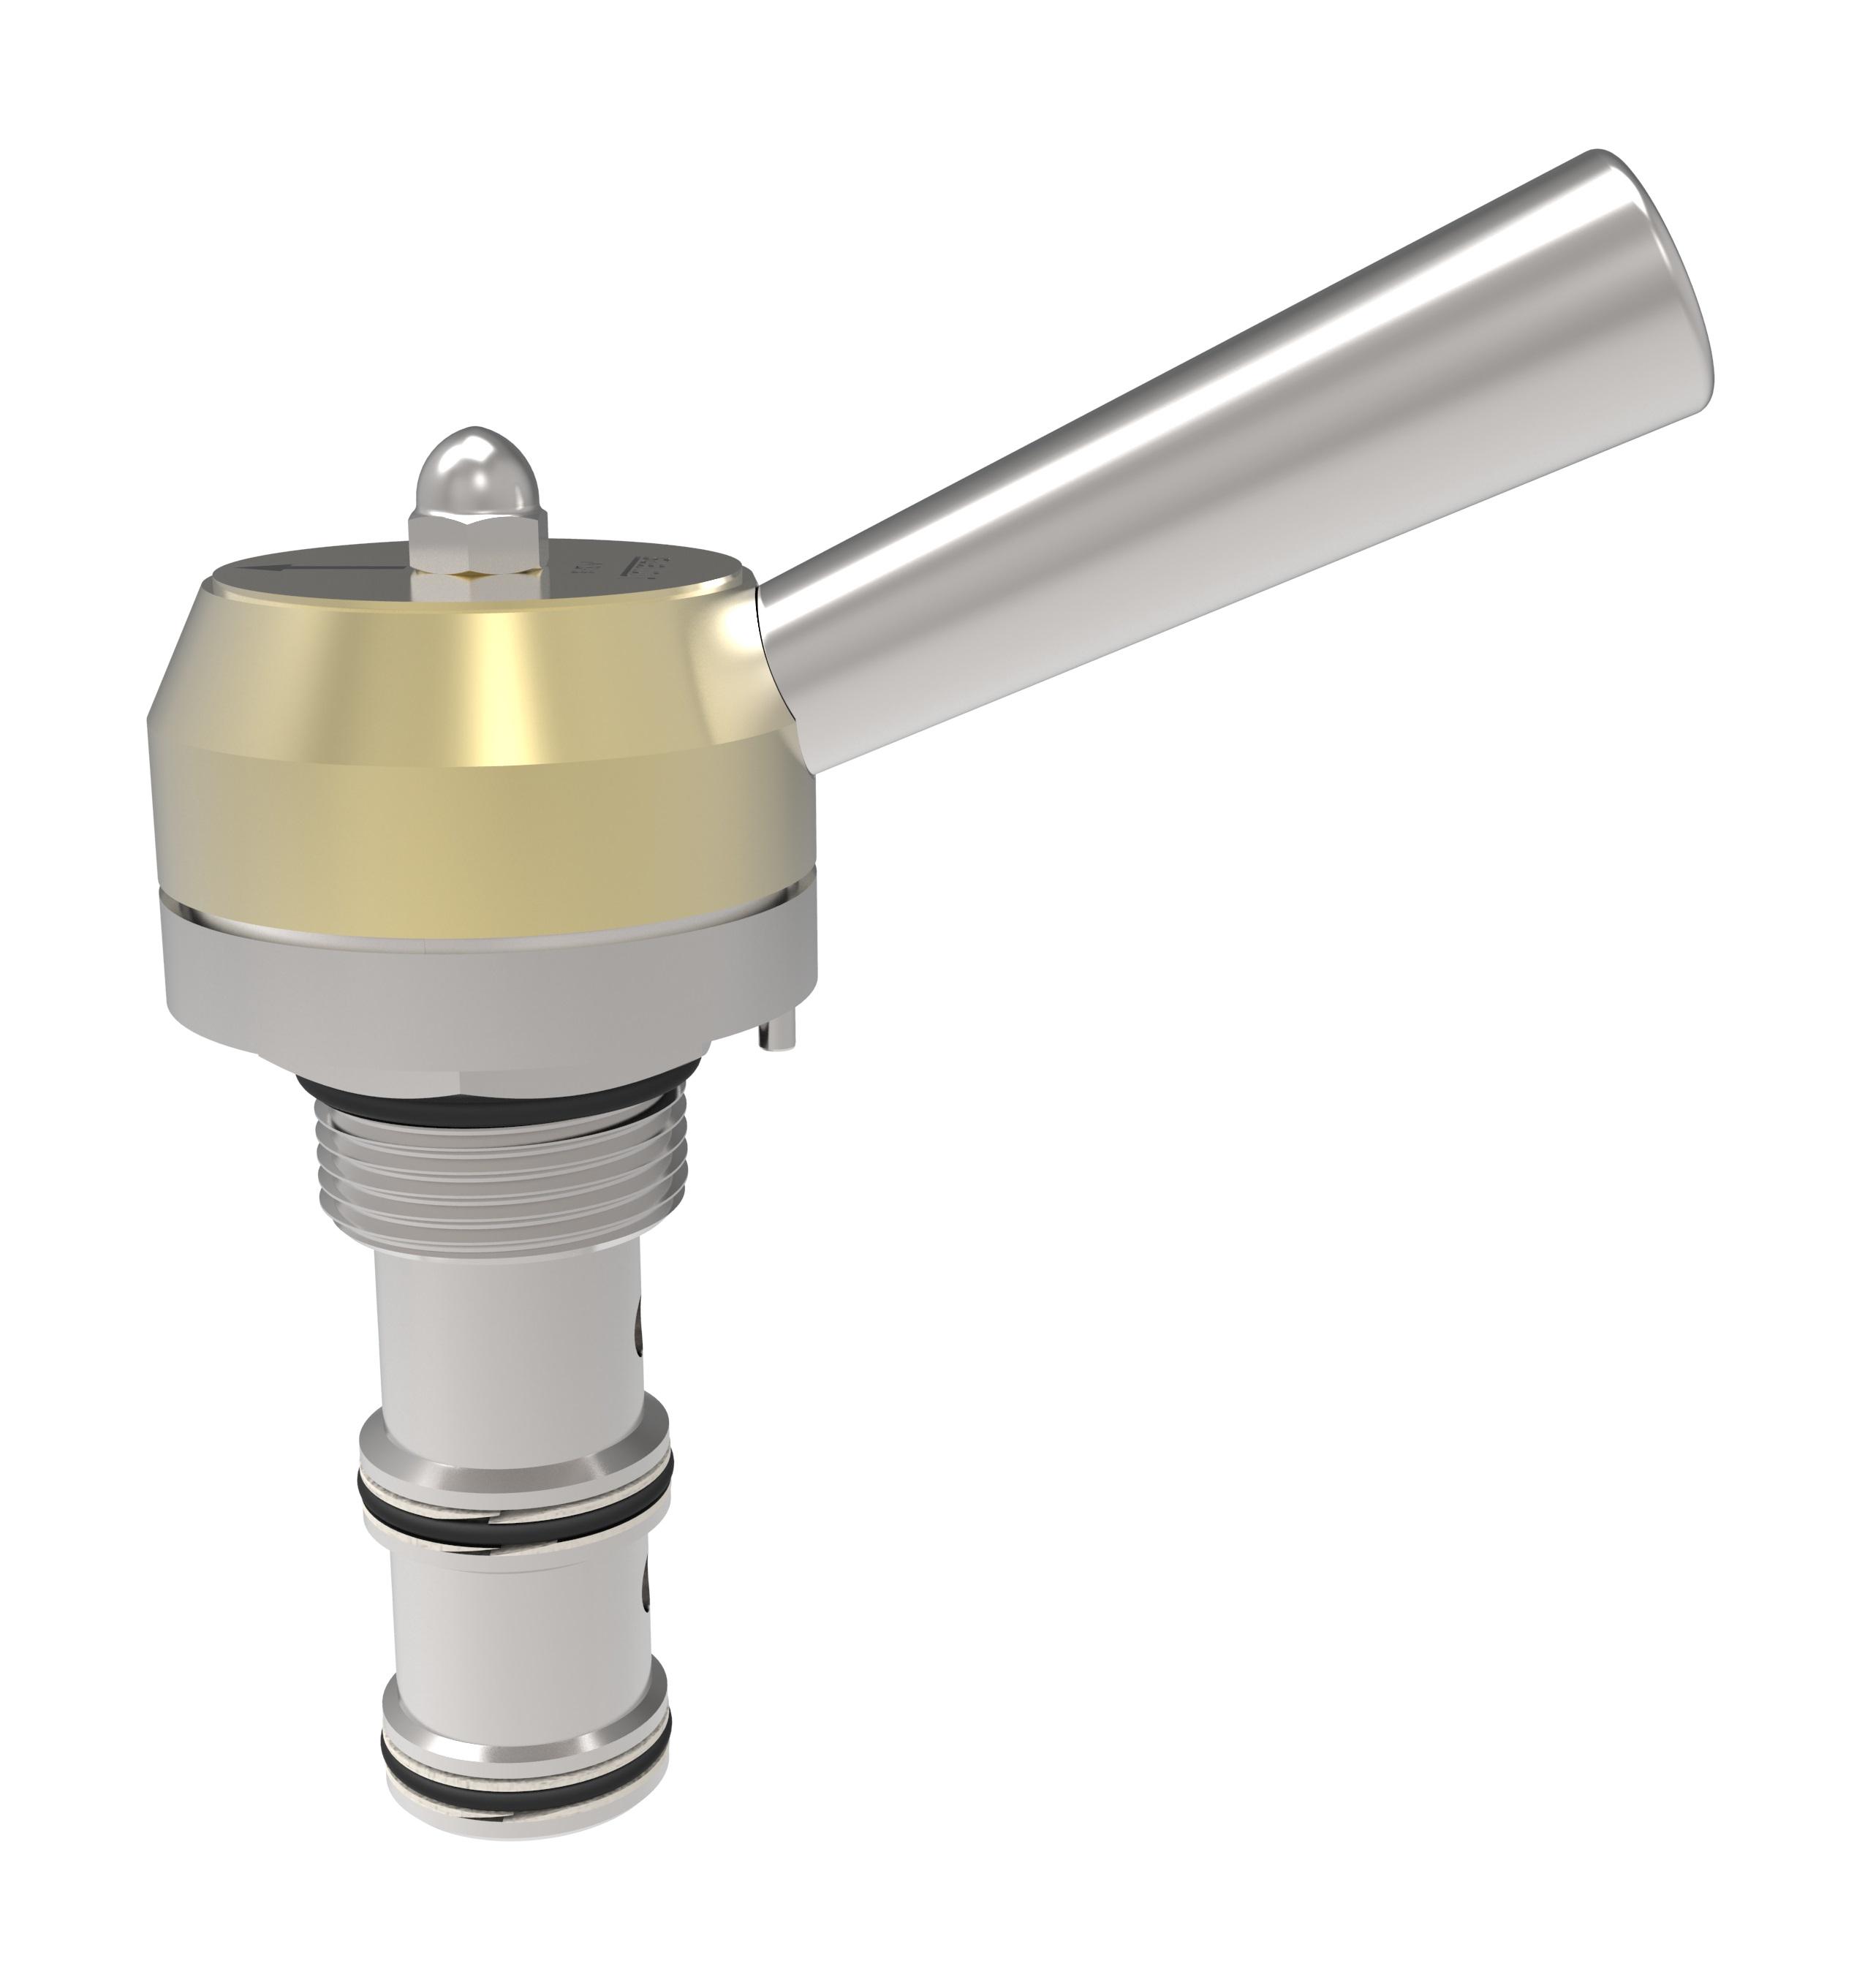 Vickers PTS6-16 Screw-in Pilot to Shift Cartridge Valve